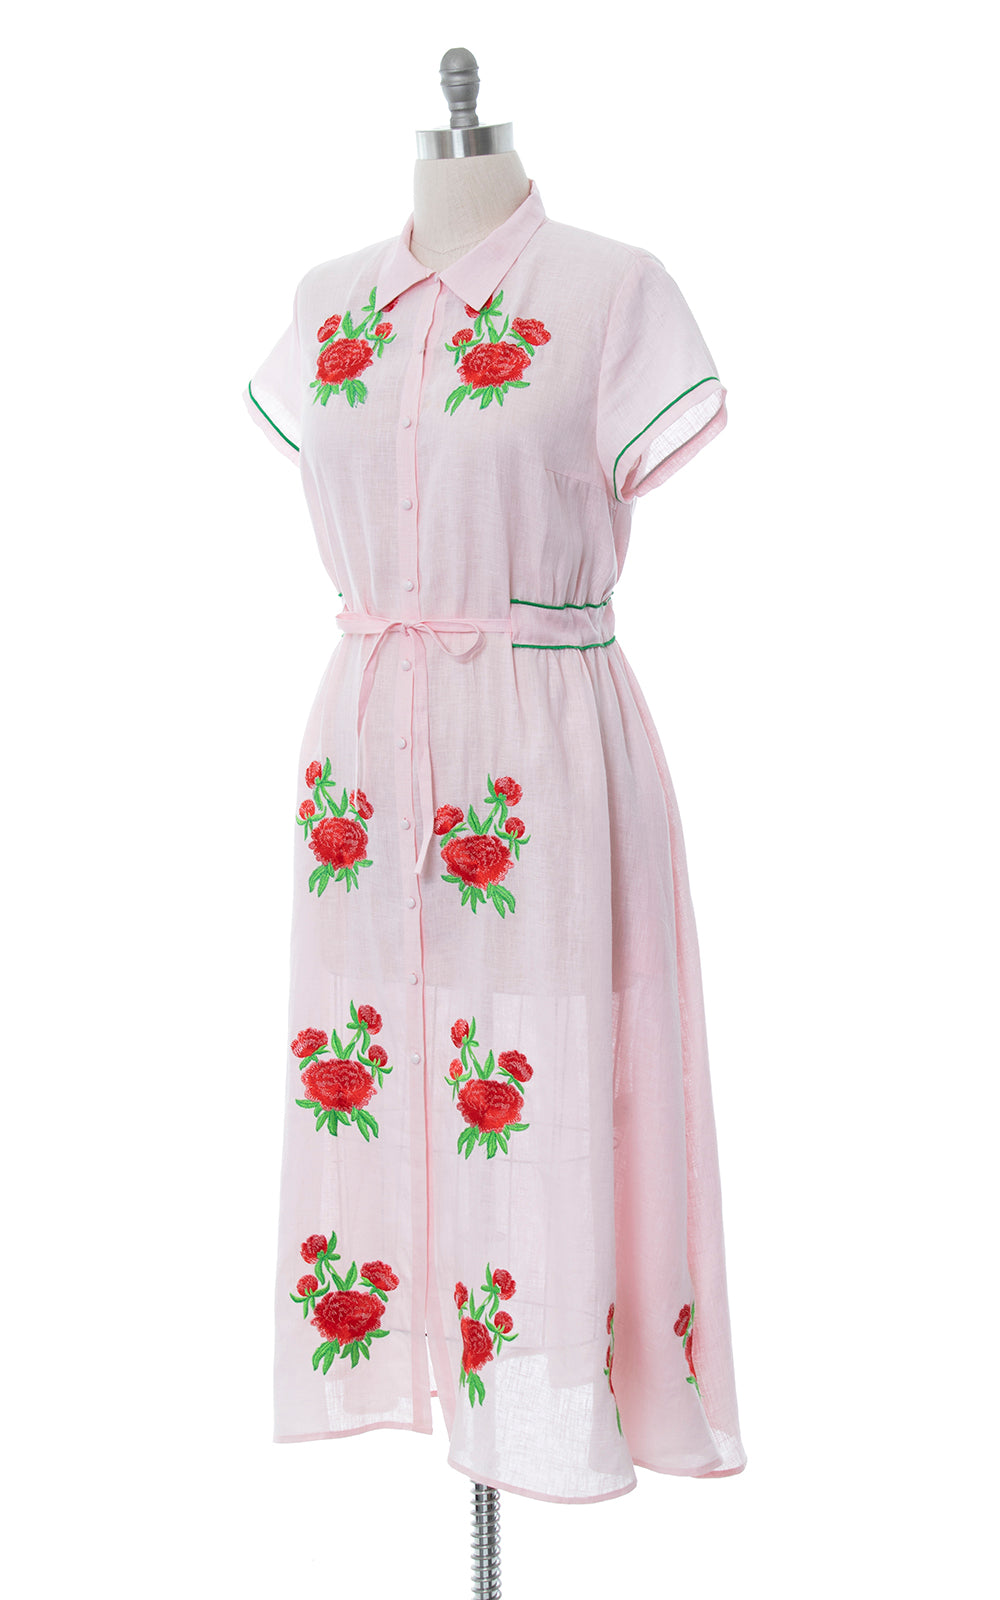 MODERN 1950s Style Embroidered Linen Dress | large/x-large